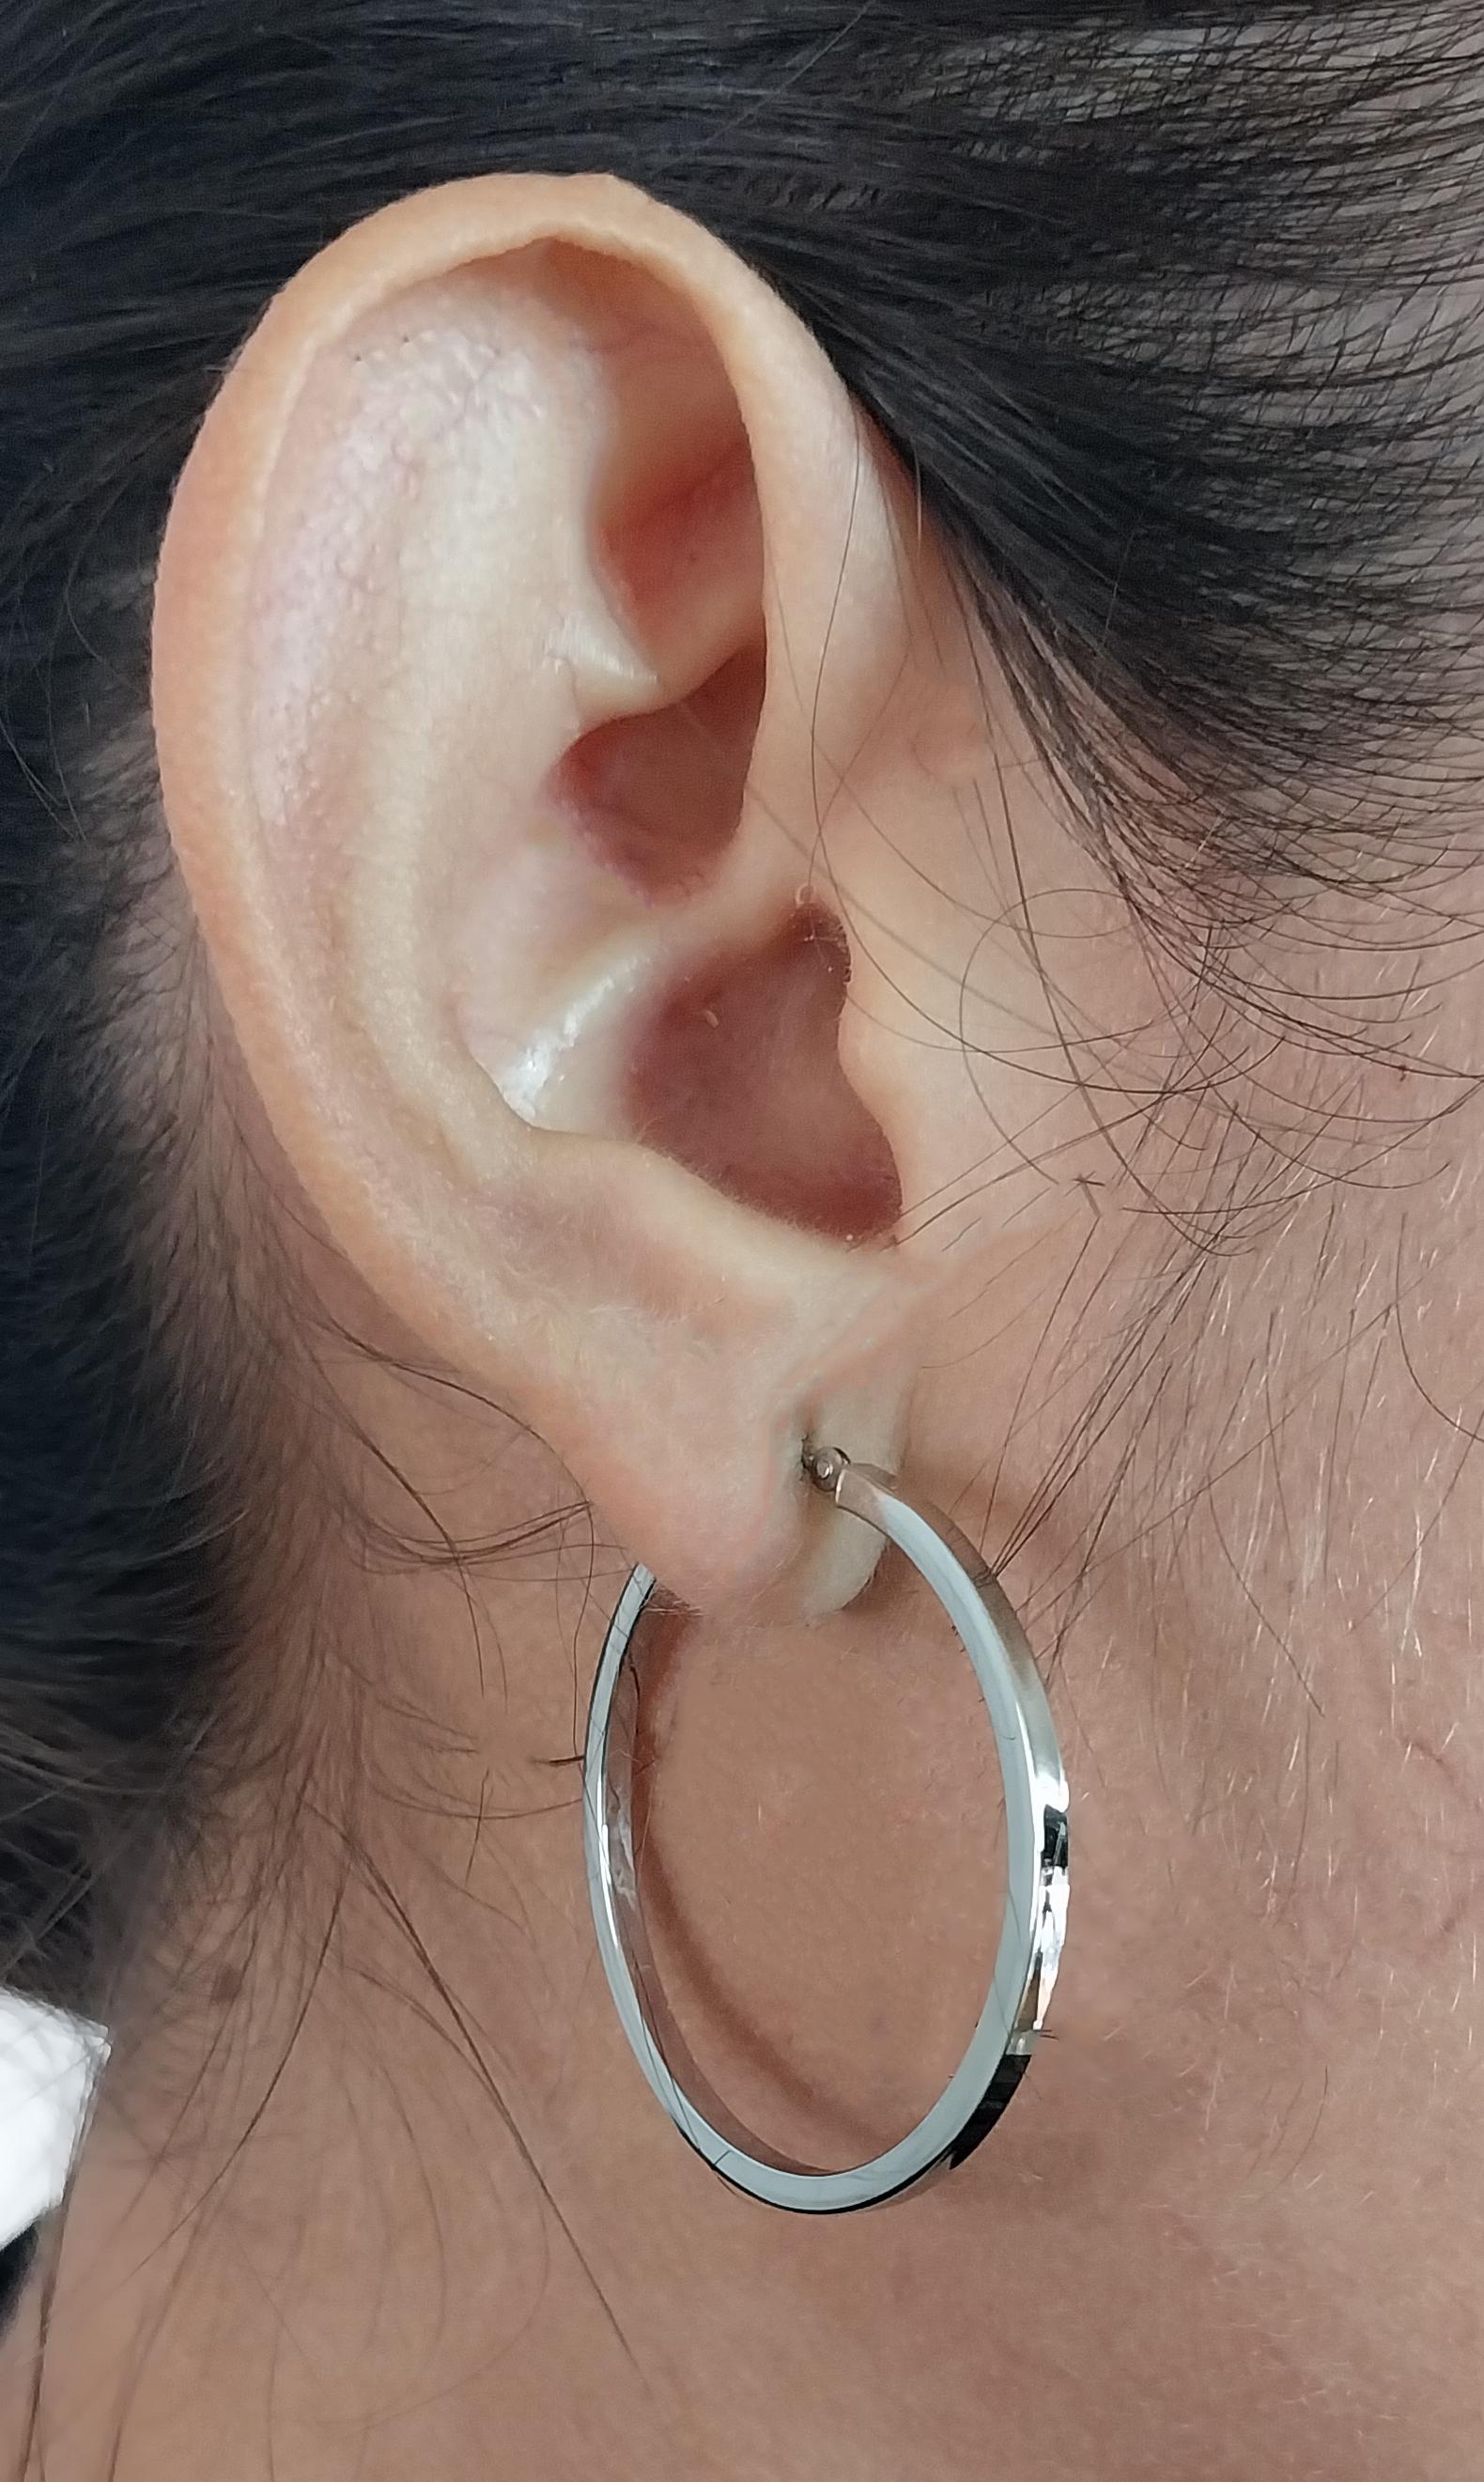 14 Karat White Gold 2mm Hoop Earrings with a 1.5 Inch Diameter and Square Edges. Pierced Post with Hinged Clip Closure. Finished Weight is 2.5 Grams.